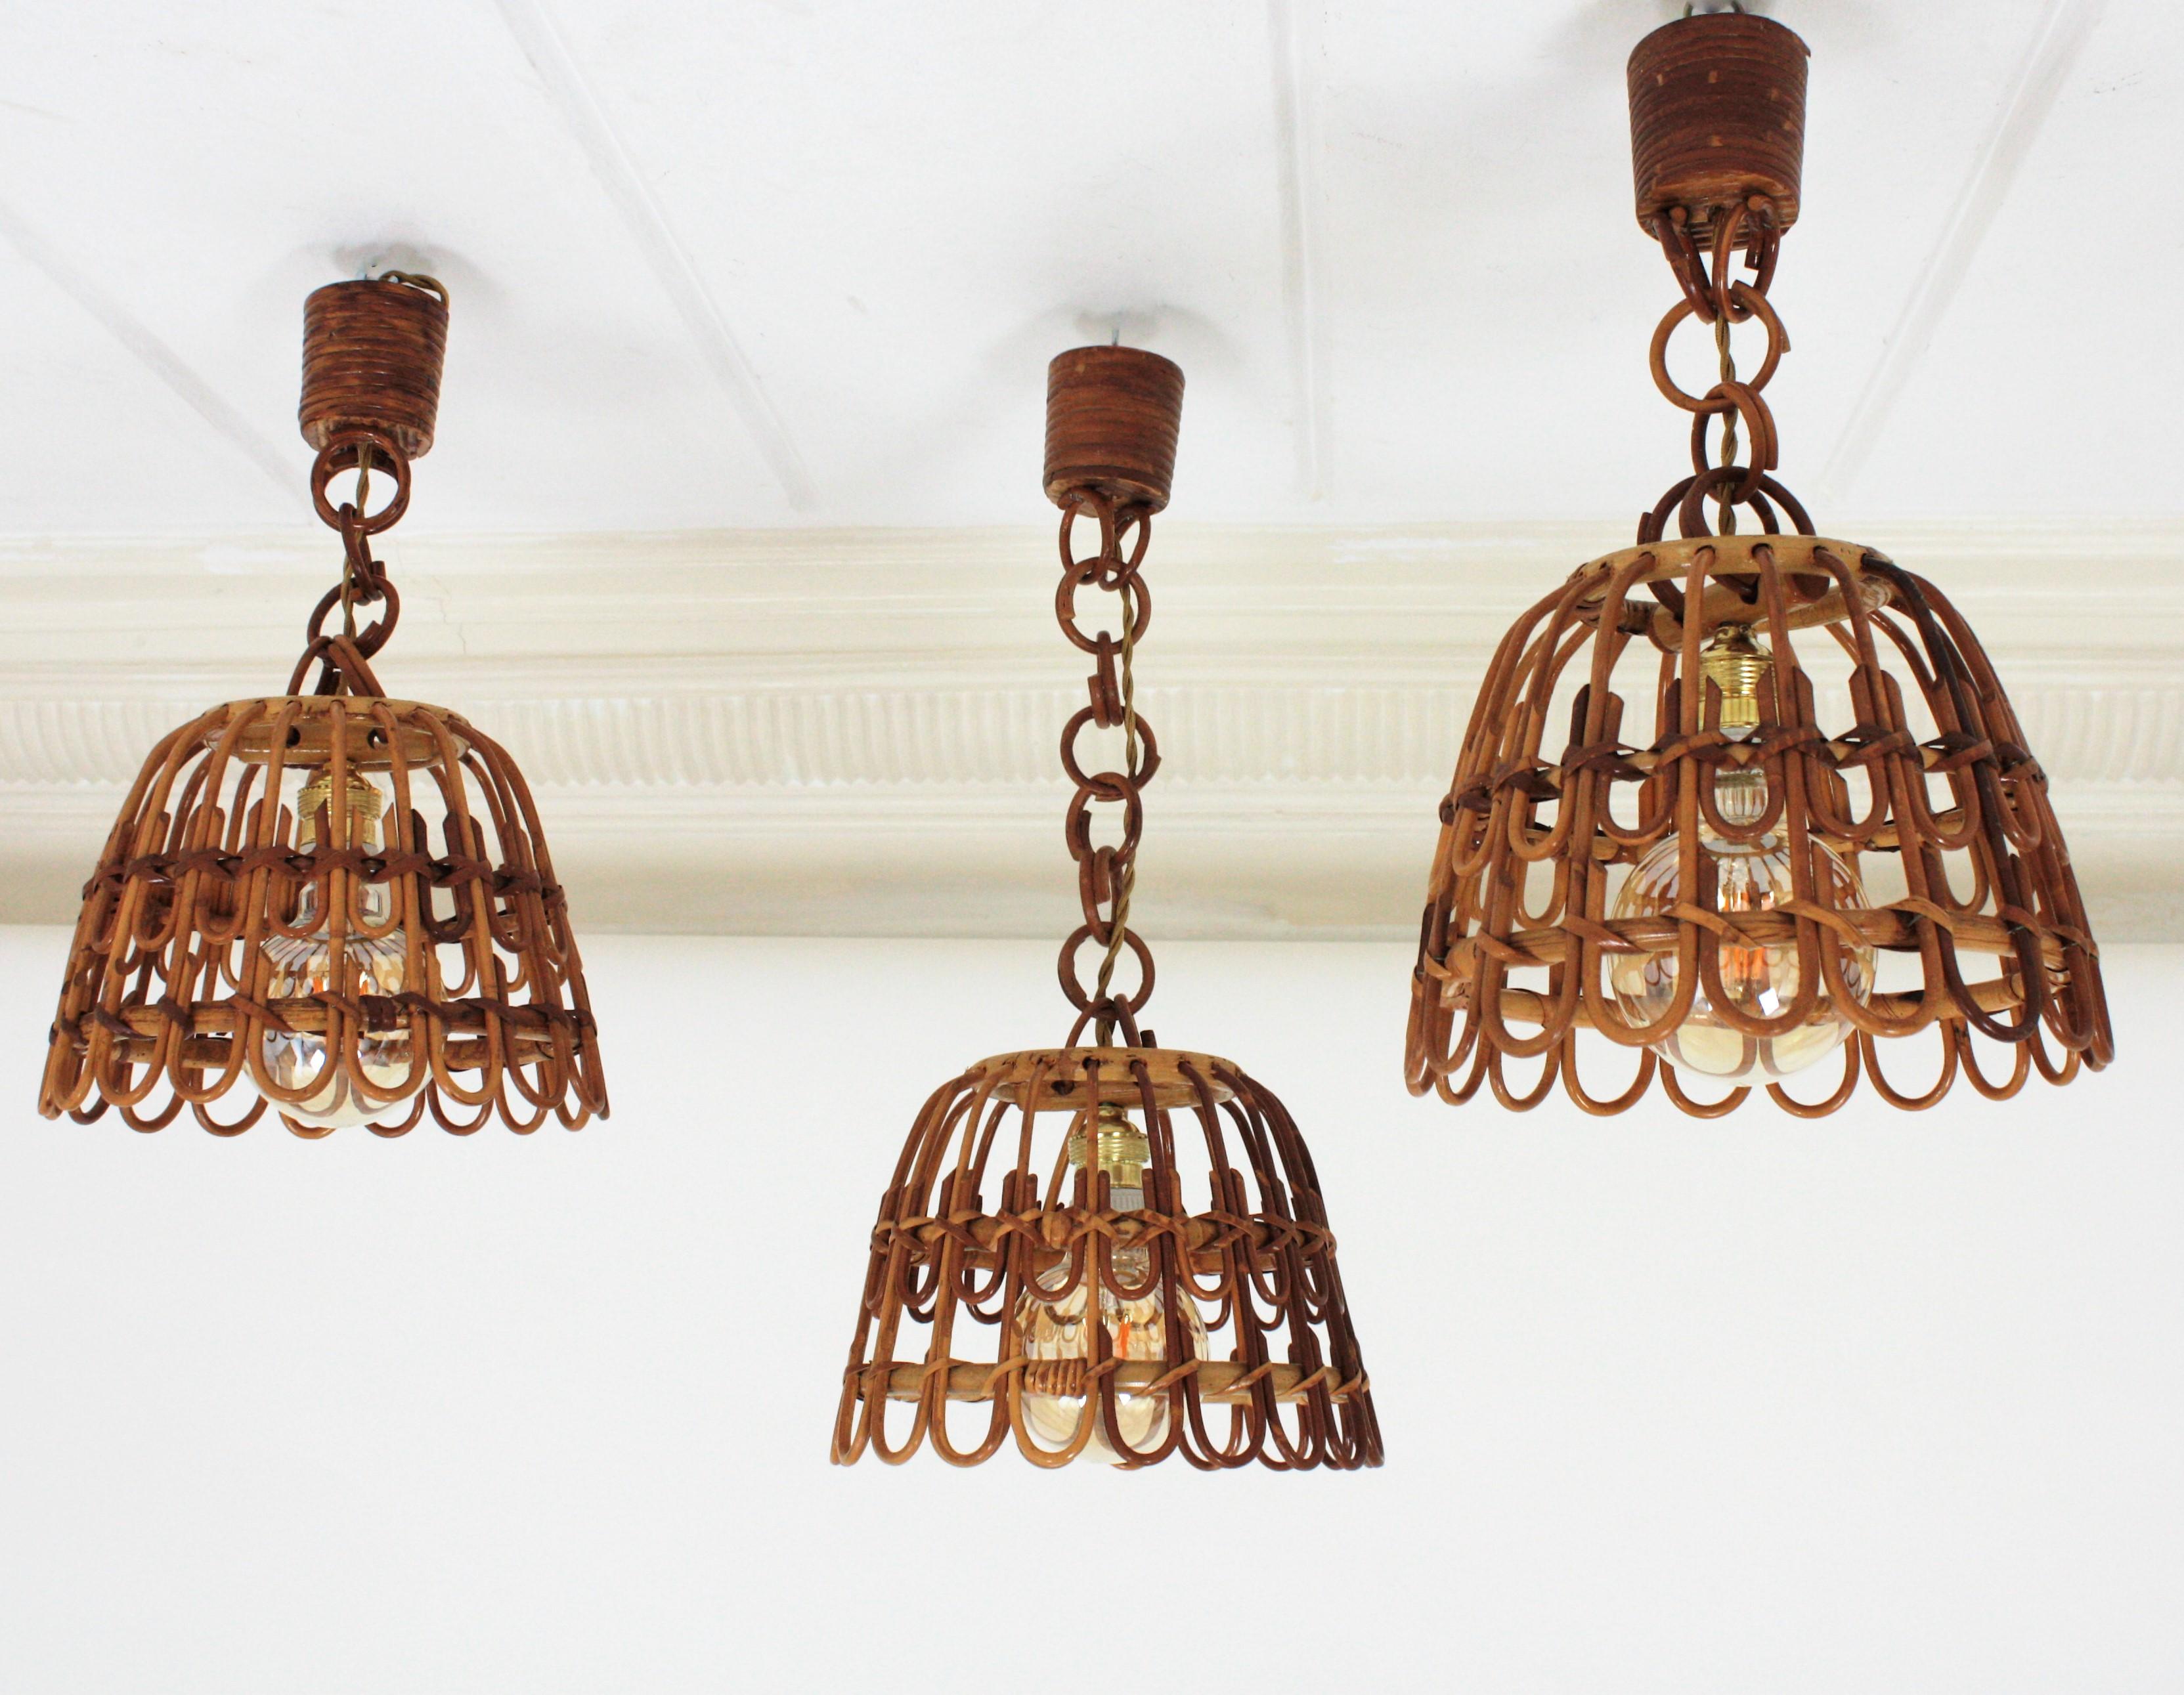 Set of Three Rattan Bell Shaped Pendants
A beautiful set of three modernist rattan /wicker bell shaped pendant light with geometric petal design, Spain, 1960s.
They hang from a rattan / bamboo chain ended by a wicker lined canopy.
These lamps will